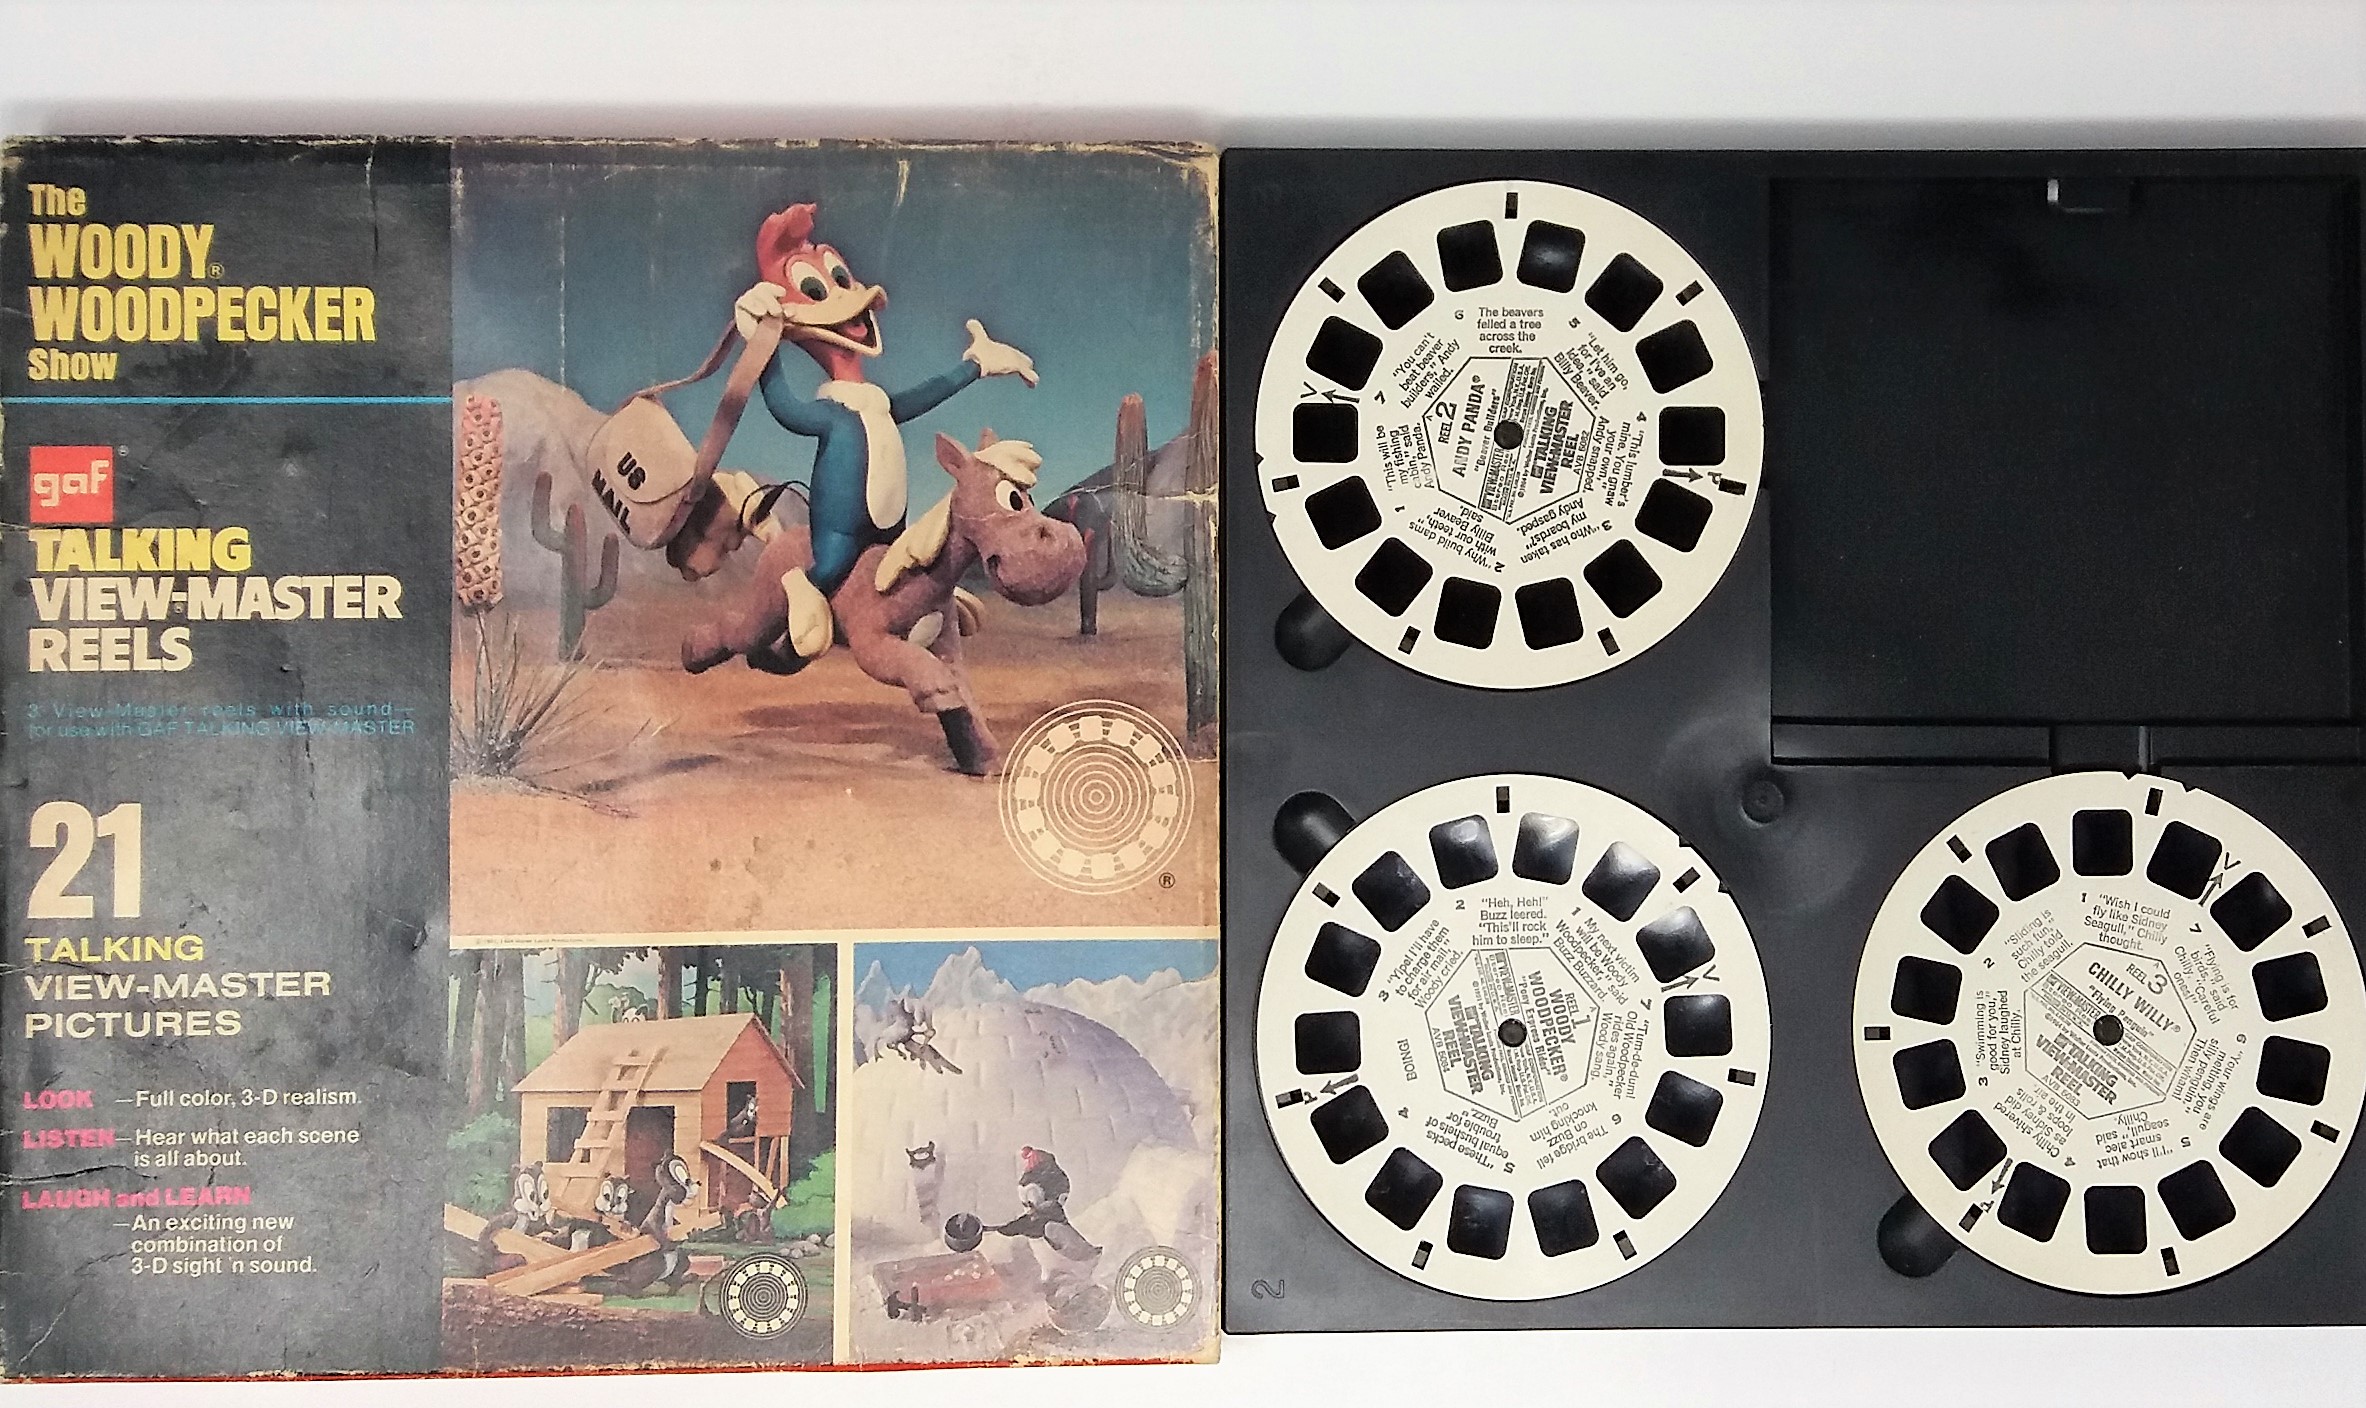 https://images.proxibid.com/AuctionImages/4210/166573/TheBigToyAuction_AT22_Talking_Viewmaster_The_Woody_Woodpecker_Show_4.jpg